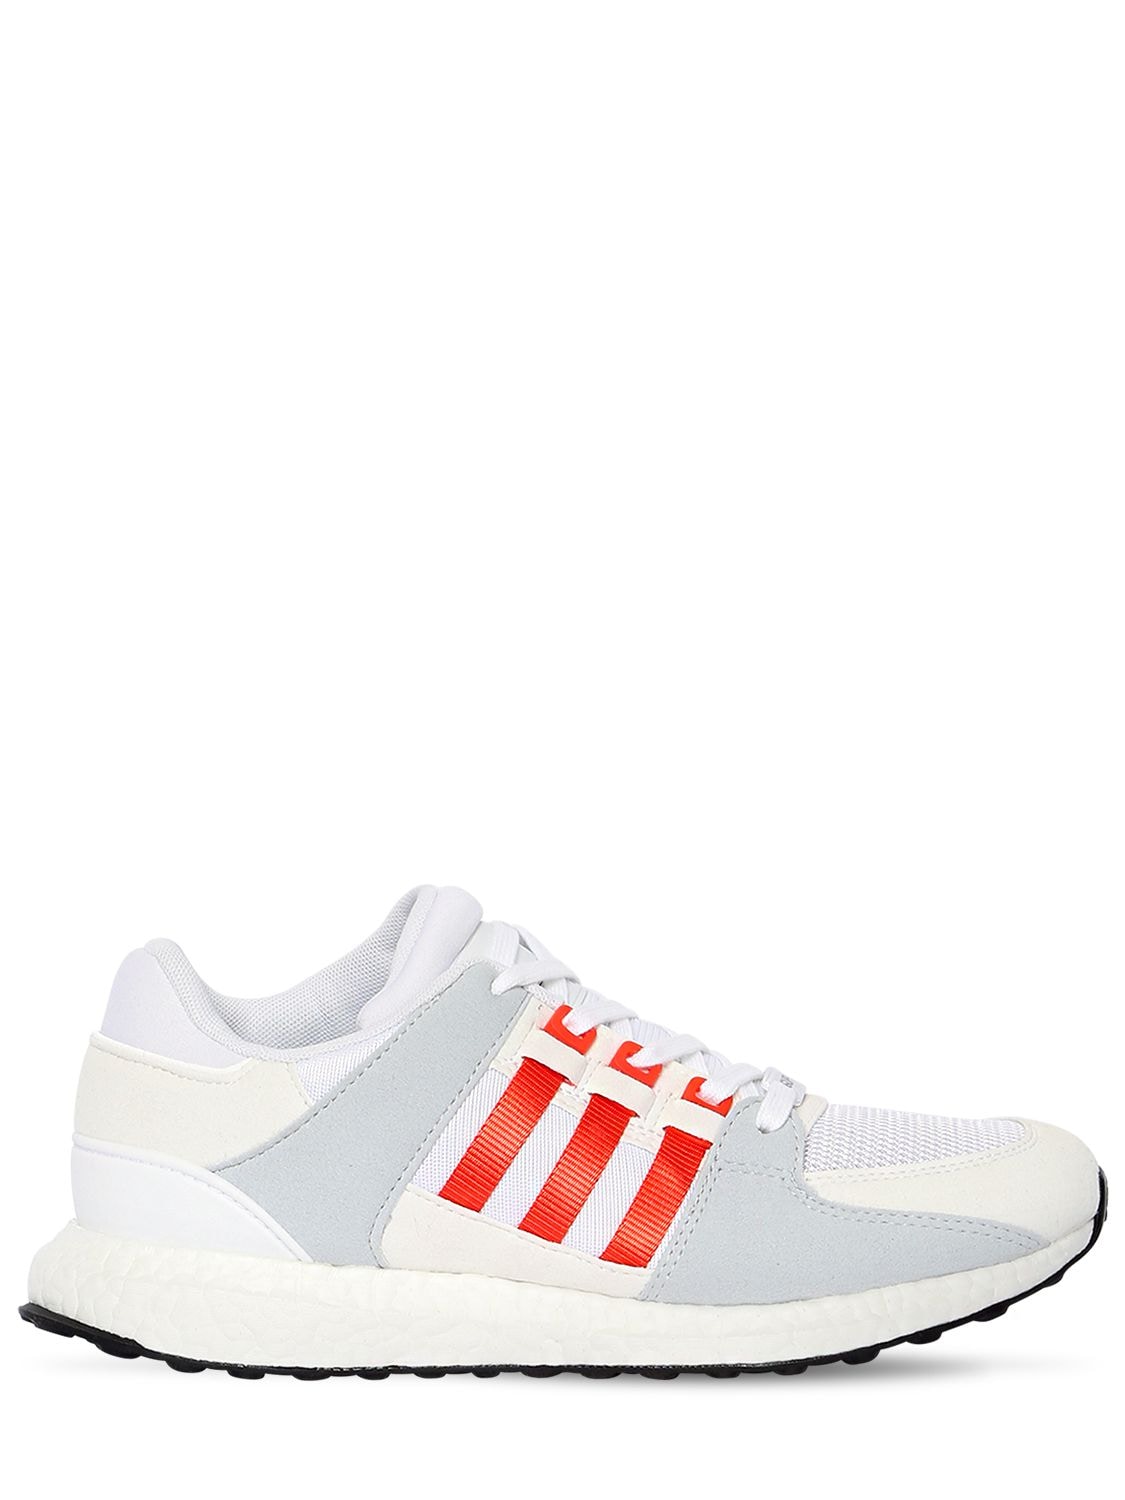 Eqt Support Ultra Sneakers